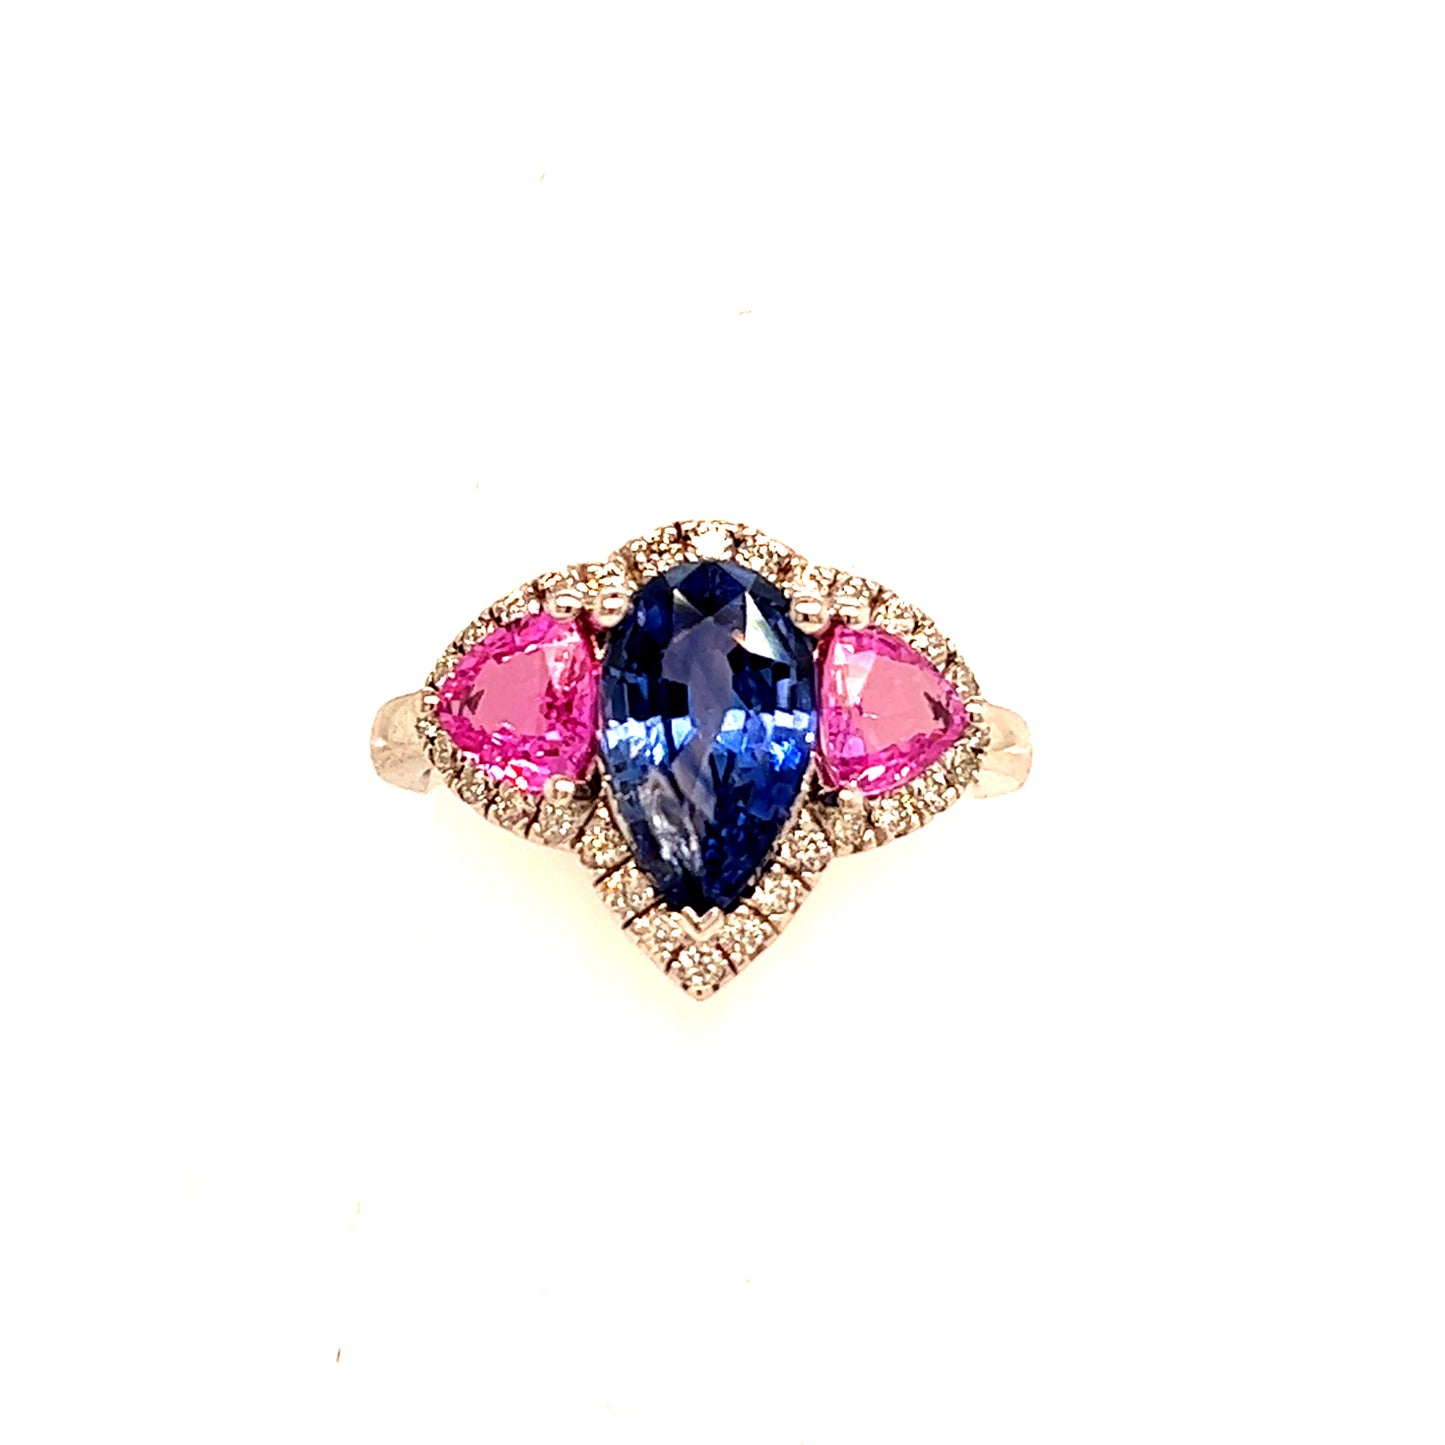 Natural Sapphire Diamond Ring Size 6.5 14k Gold 3.43 TCW Certified $7,950 215419 - Certified Estate Jewelry